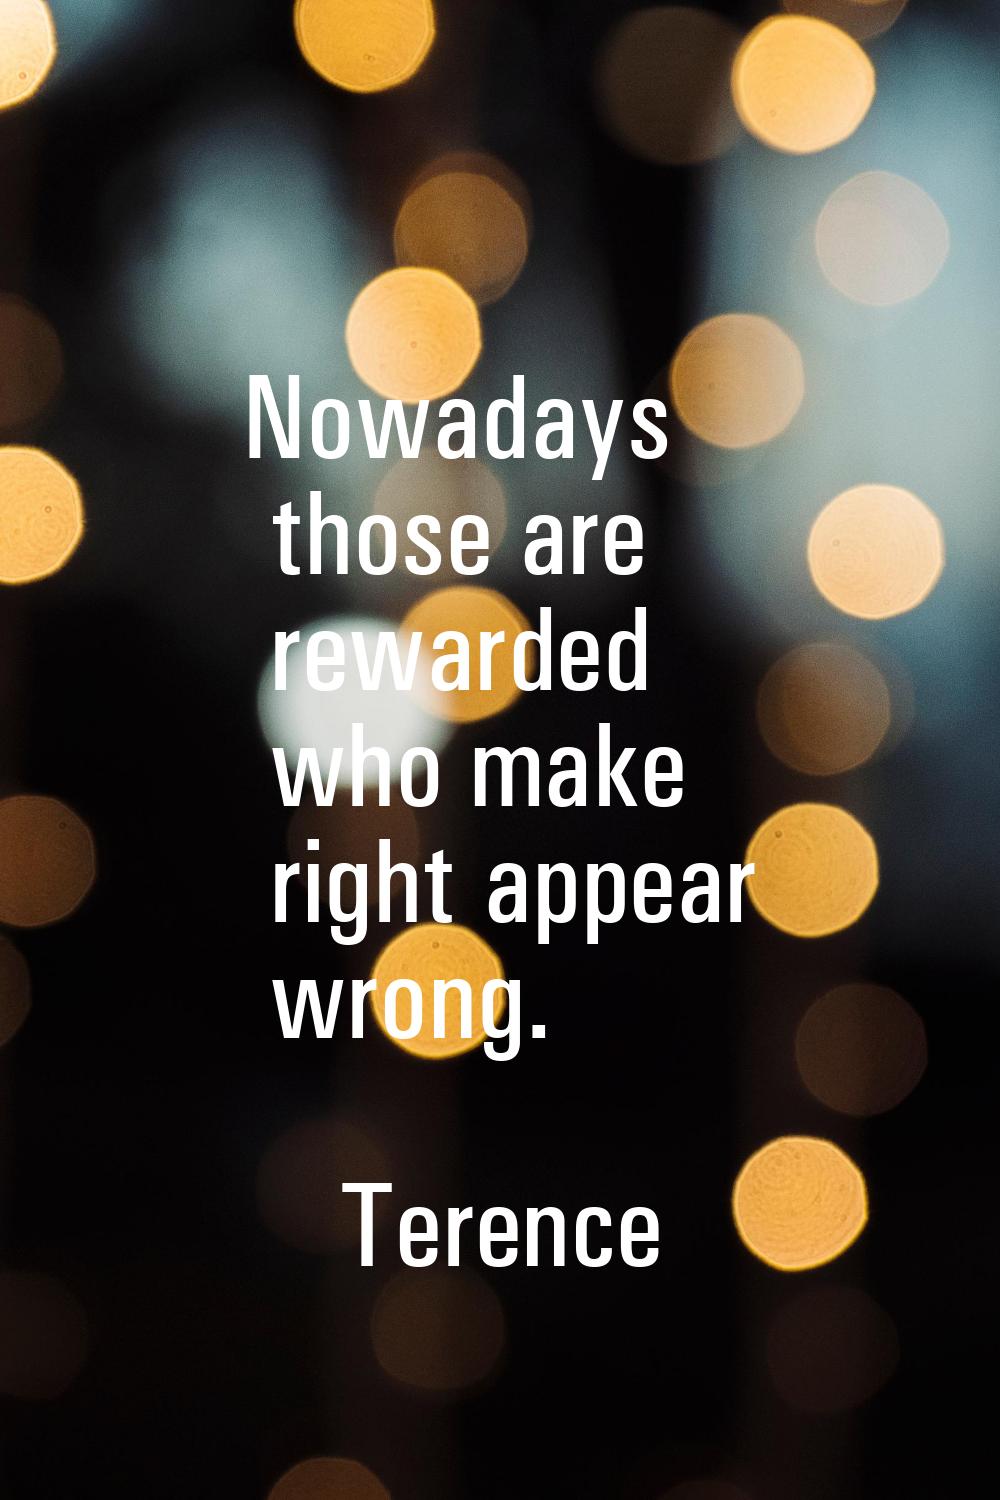 Nowadays those are rewarded who make right appear wrong.